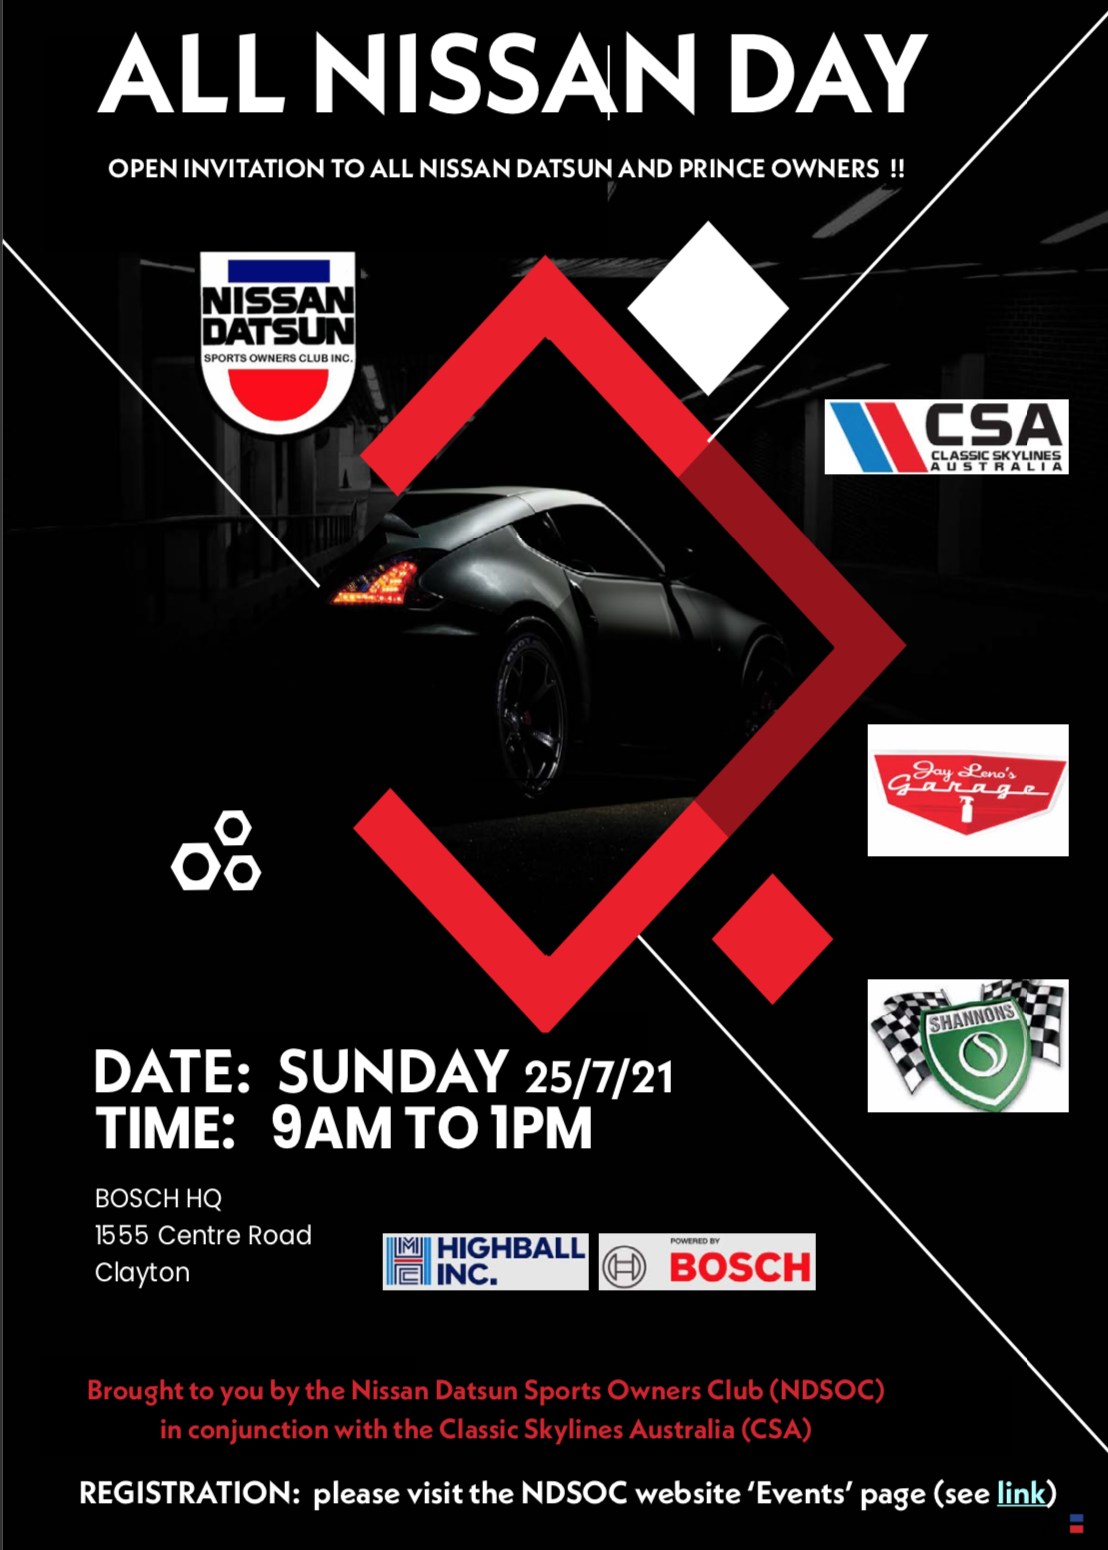 All Nissan Day